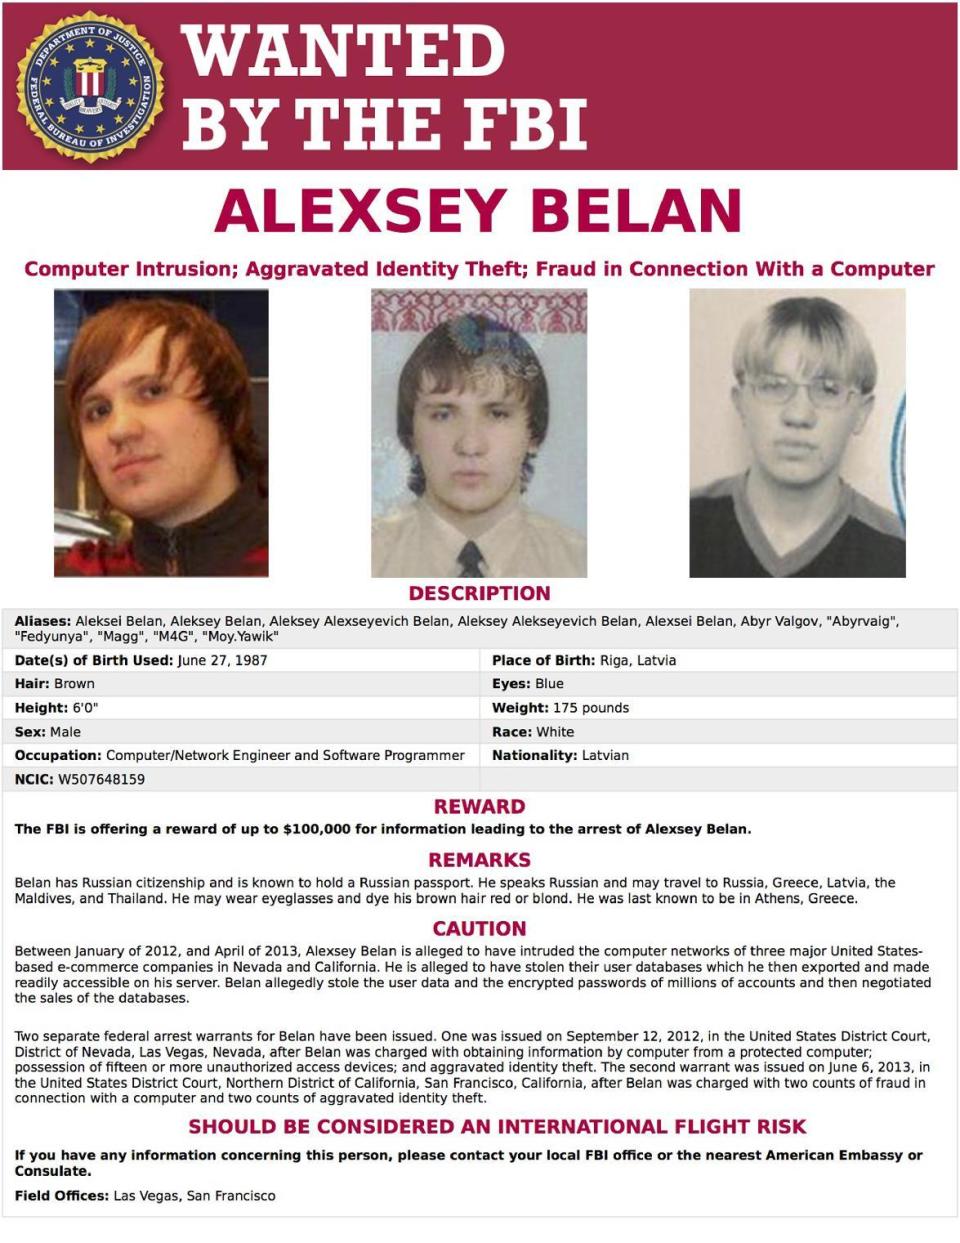 This image provided by the FBI shows the wanted poster for Alexsey Belan. In a sweeping response to election hacking, President Barack Obama sanctioned Russian intelligence services and their top officials, kicked out 35 Russian officials and shuttered two Russian-owned compounds in the U.S. It was the strongest action the Obama administration has taken to date to retaliate for a cyberattack. Other individuals sanctioned include Belan and Evgeniy Bogachev, two Russian nationals who have been wanted by the FBI for cyber crimes for years. (FBI via AP)